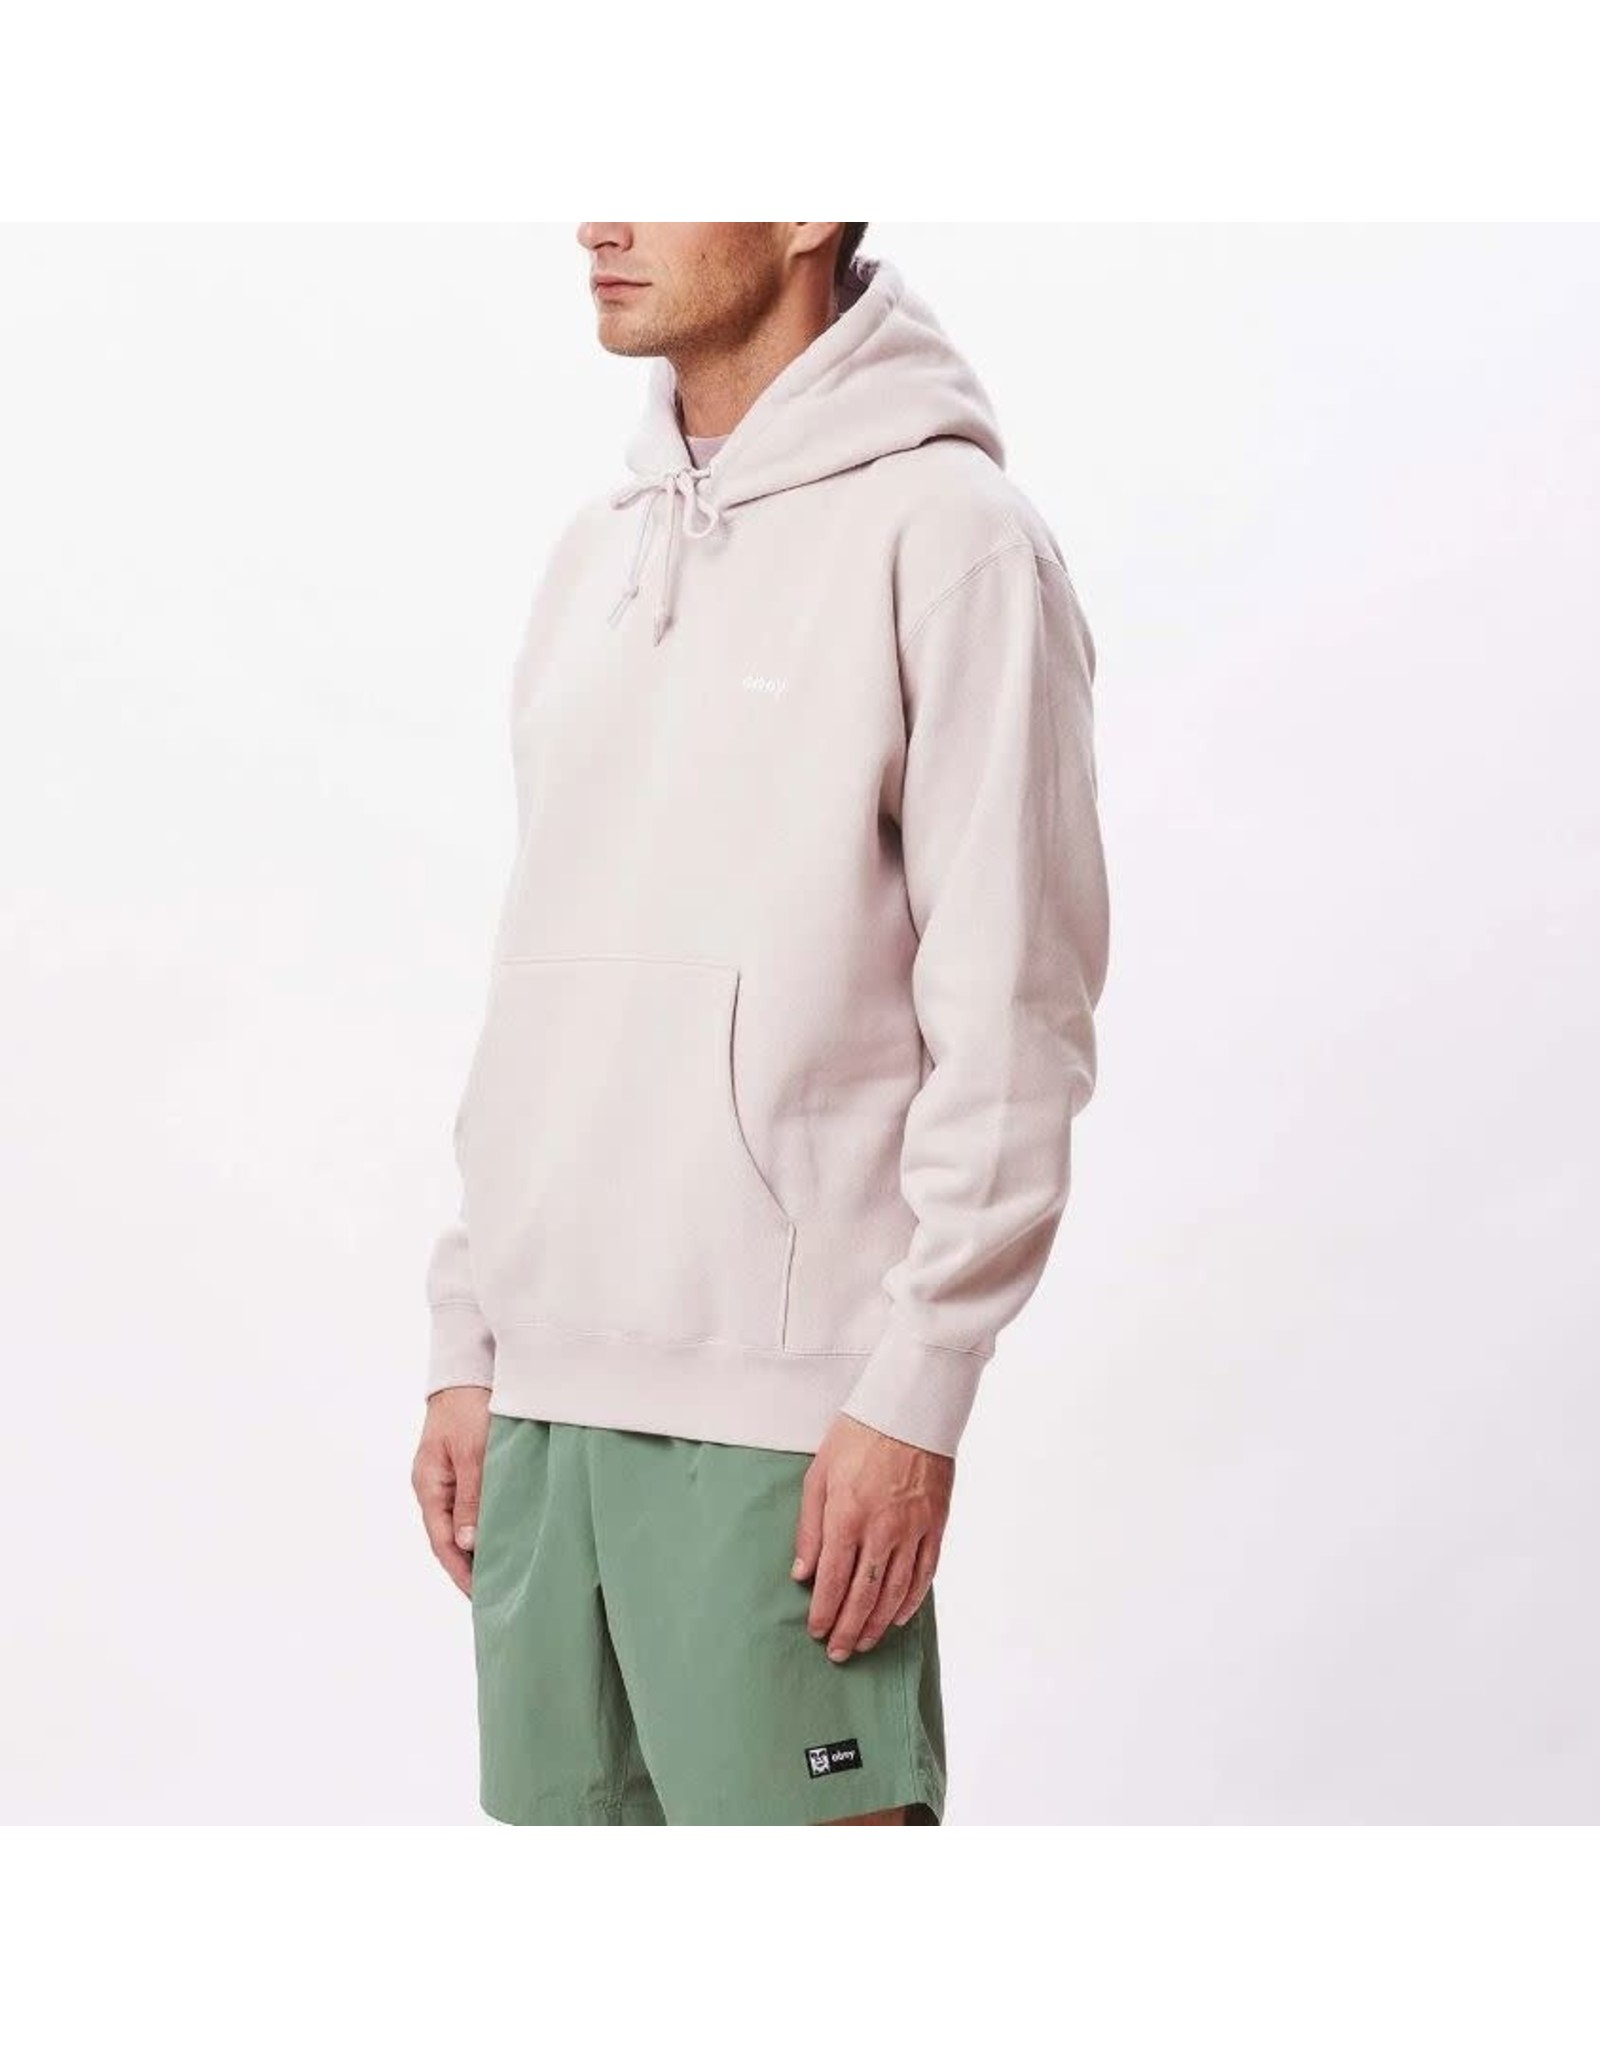 OBEY Tab Pullover Hood